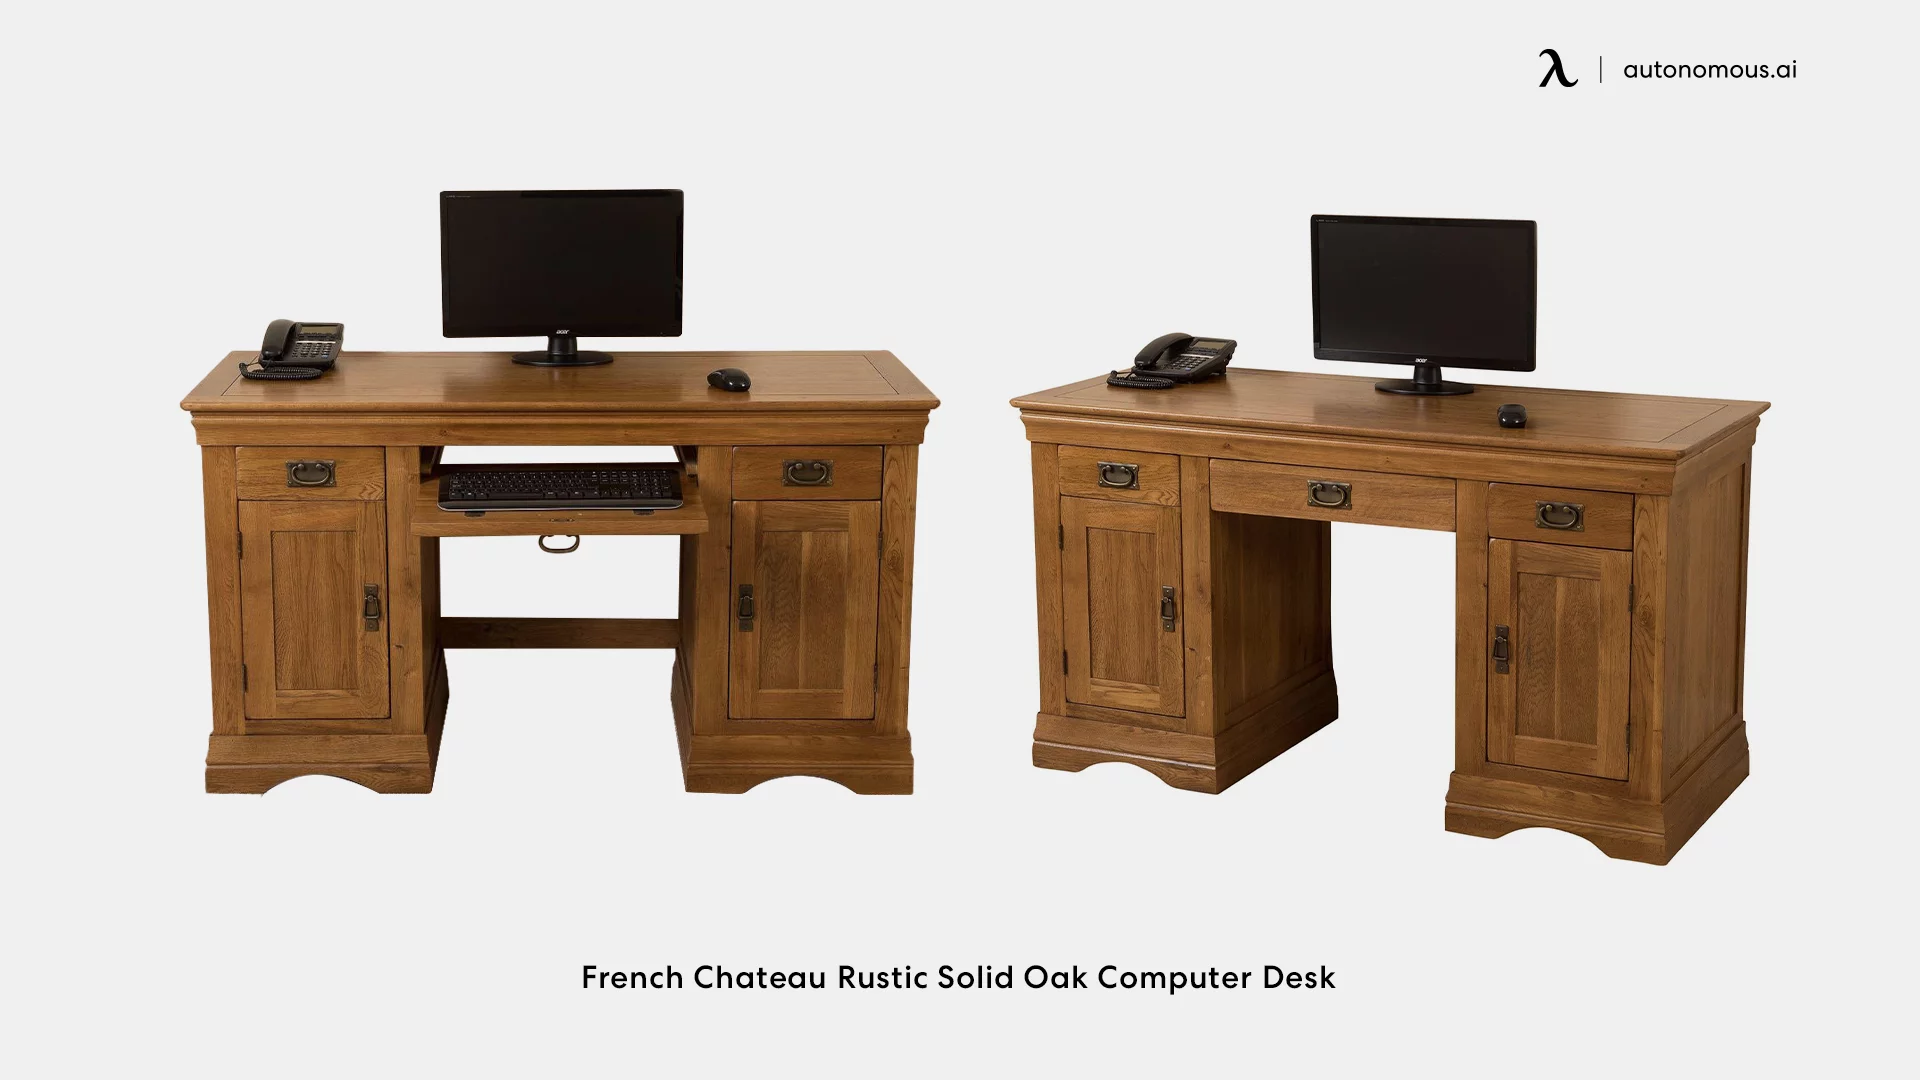 French Chateau Rustic Solid Oak Computer Desk